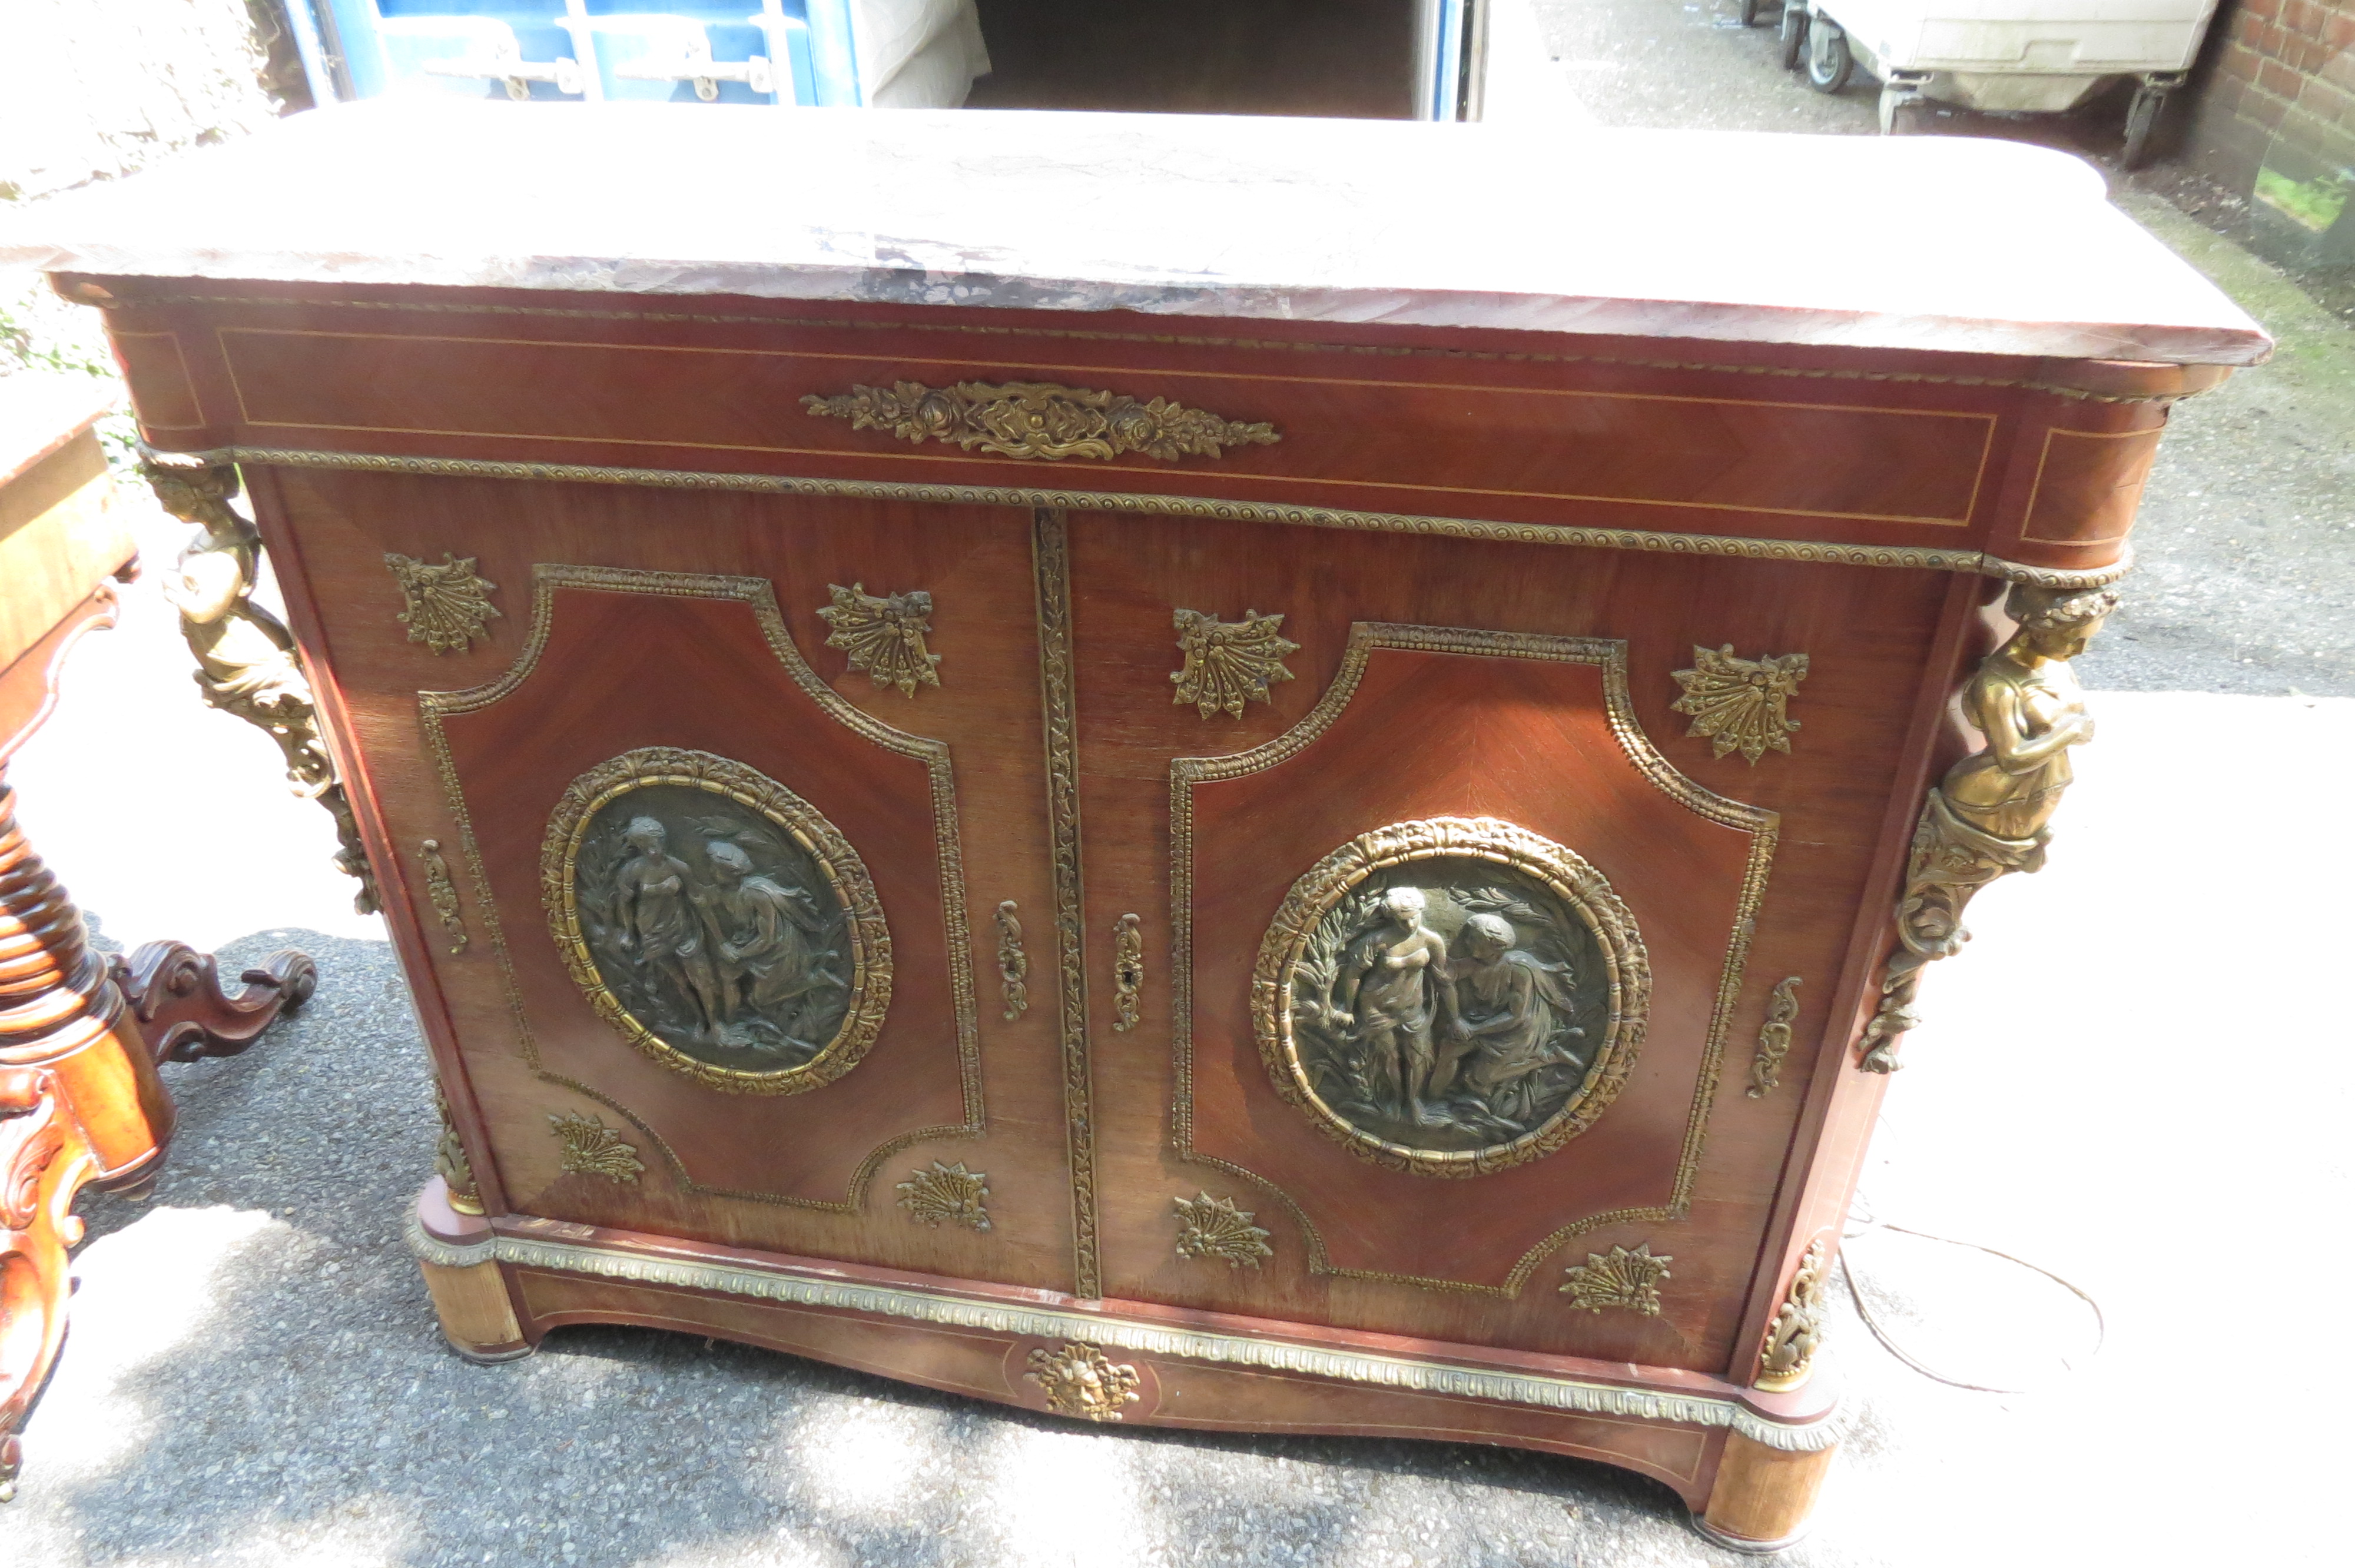 A 20th century French Empire style kingwood gilt mounted side cabinet with bronze plaques and marble